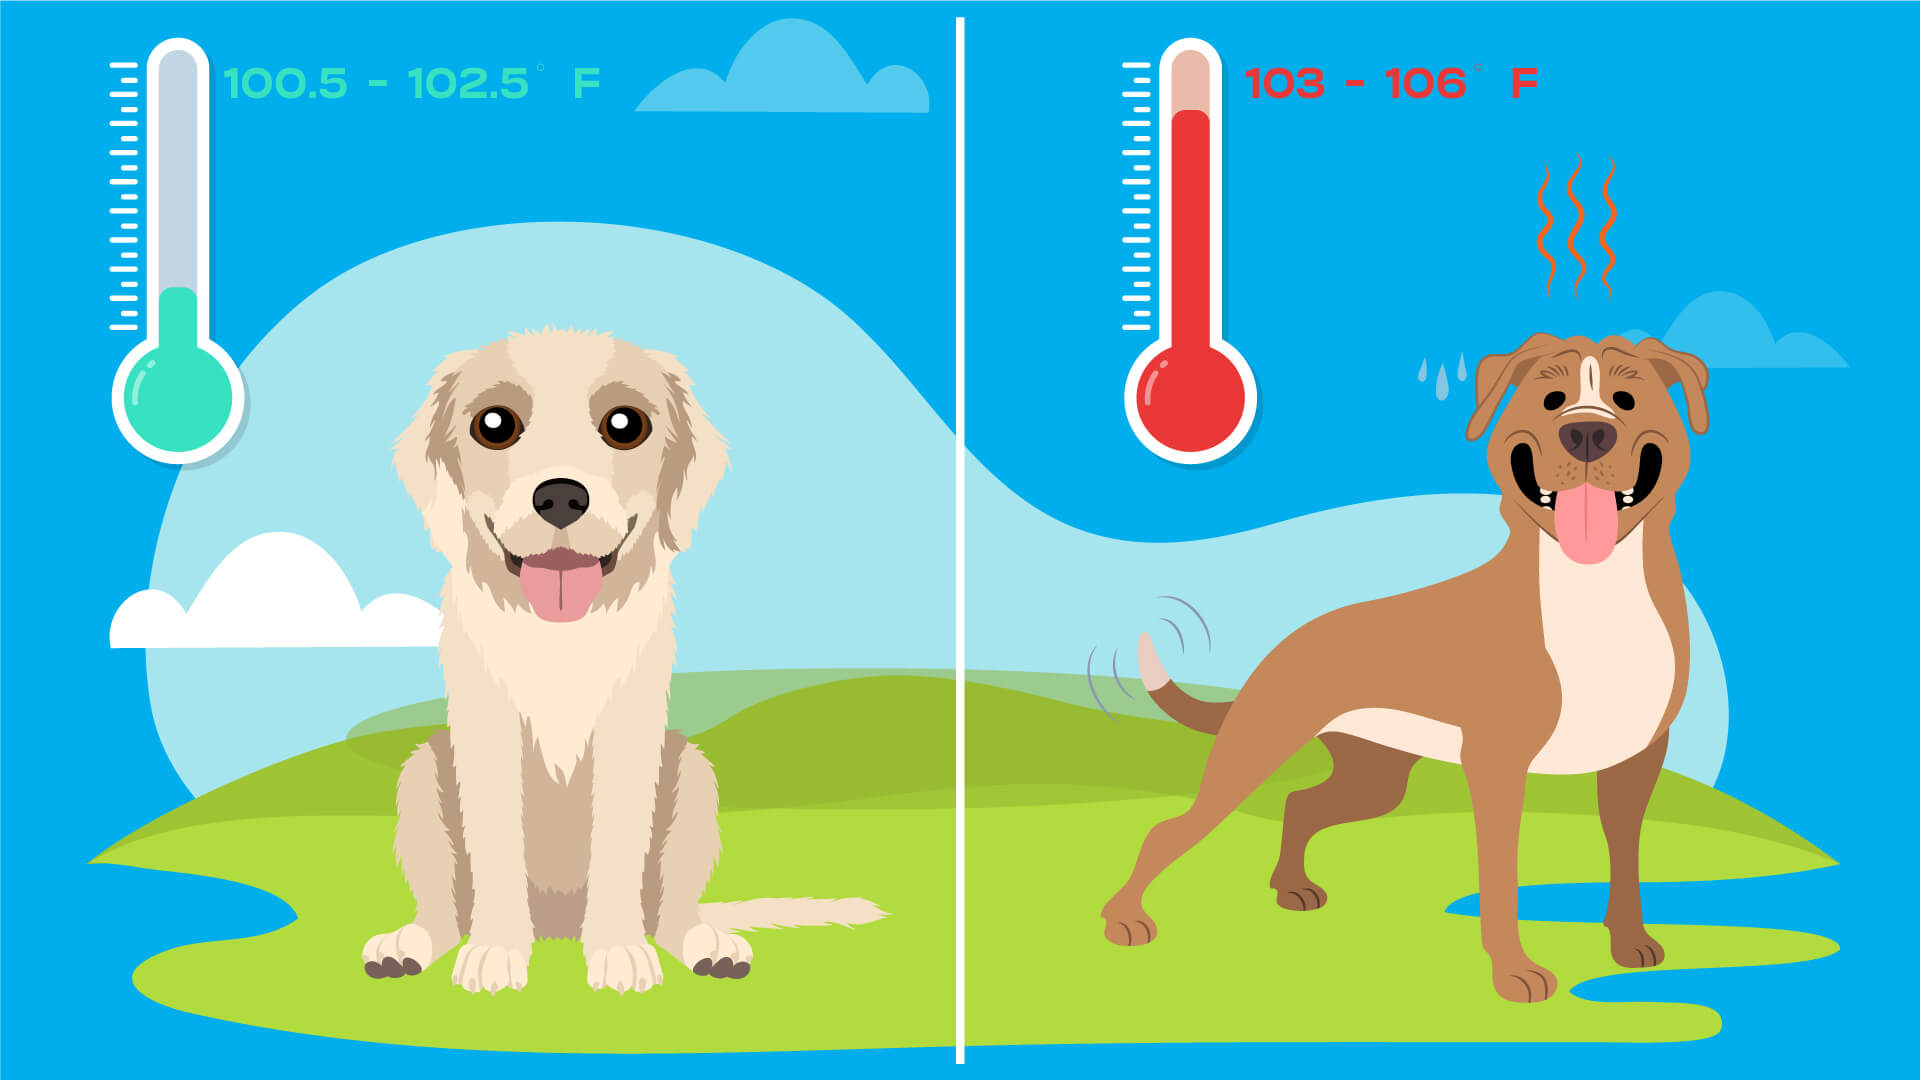 Comparison Chart of Dogs' Body Temperatures